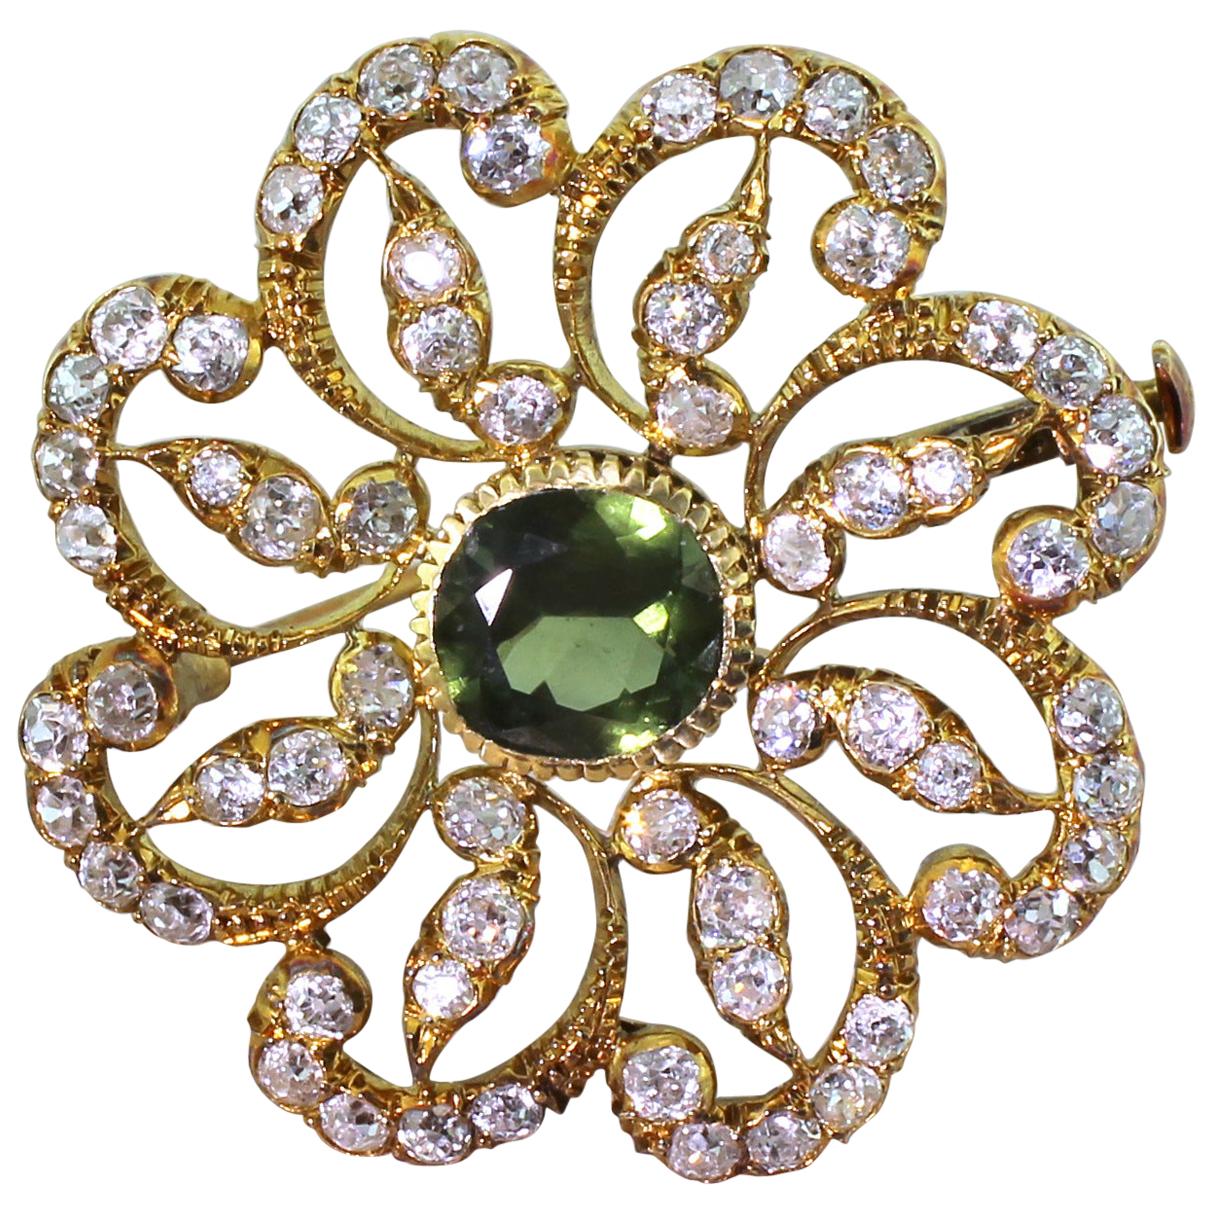 Victorian 3.00 Carat Green Sapphire and 3.50 Carat Old Cut Diamond Brooch For Sale